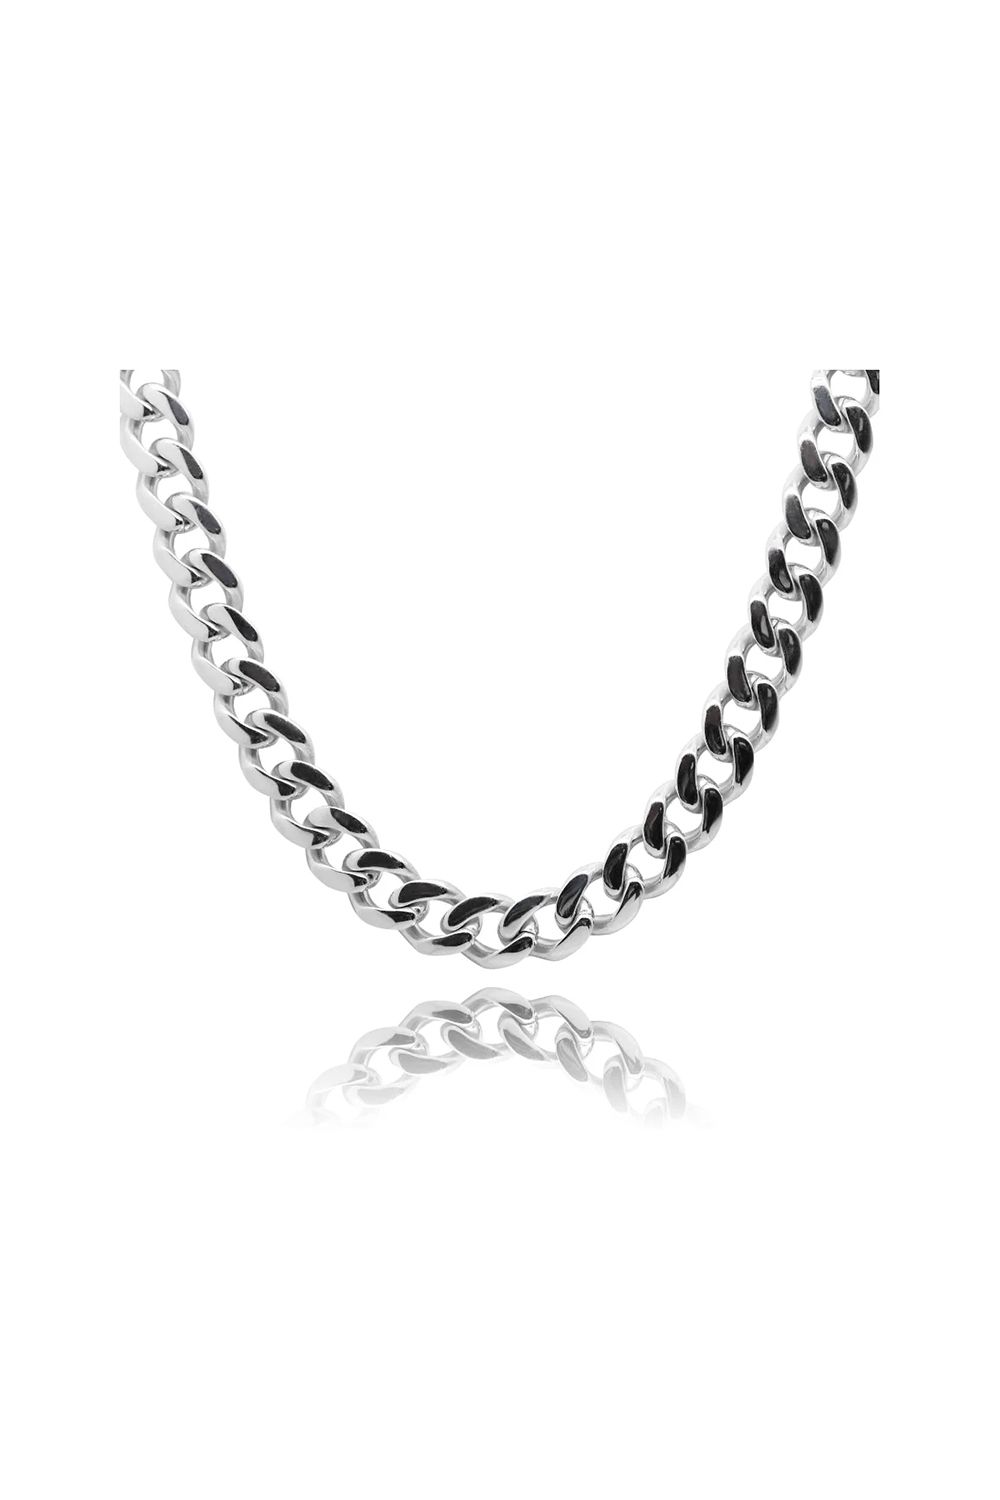 GYPPHY - CURB CHAIN NECKLACE / カーブ チェーン ネックレス STERLING